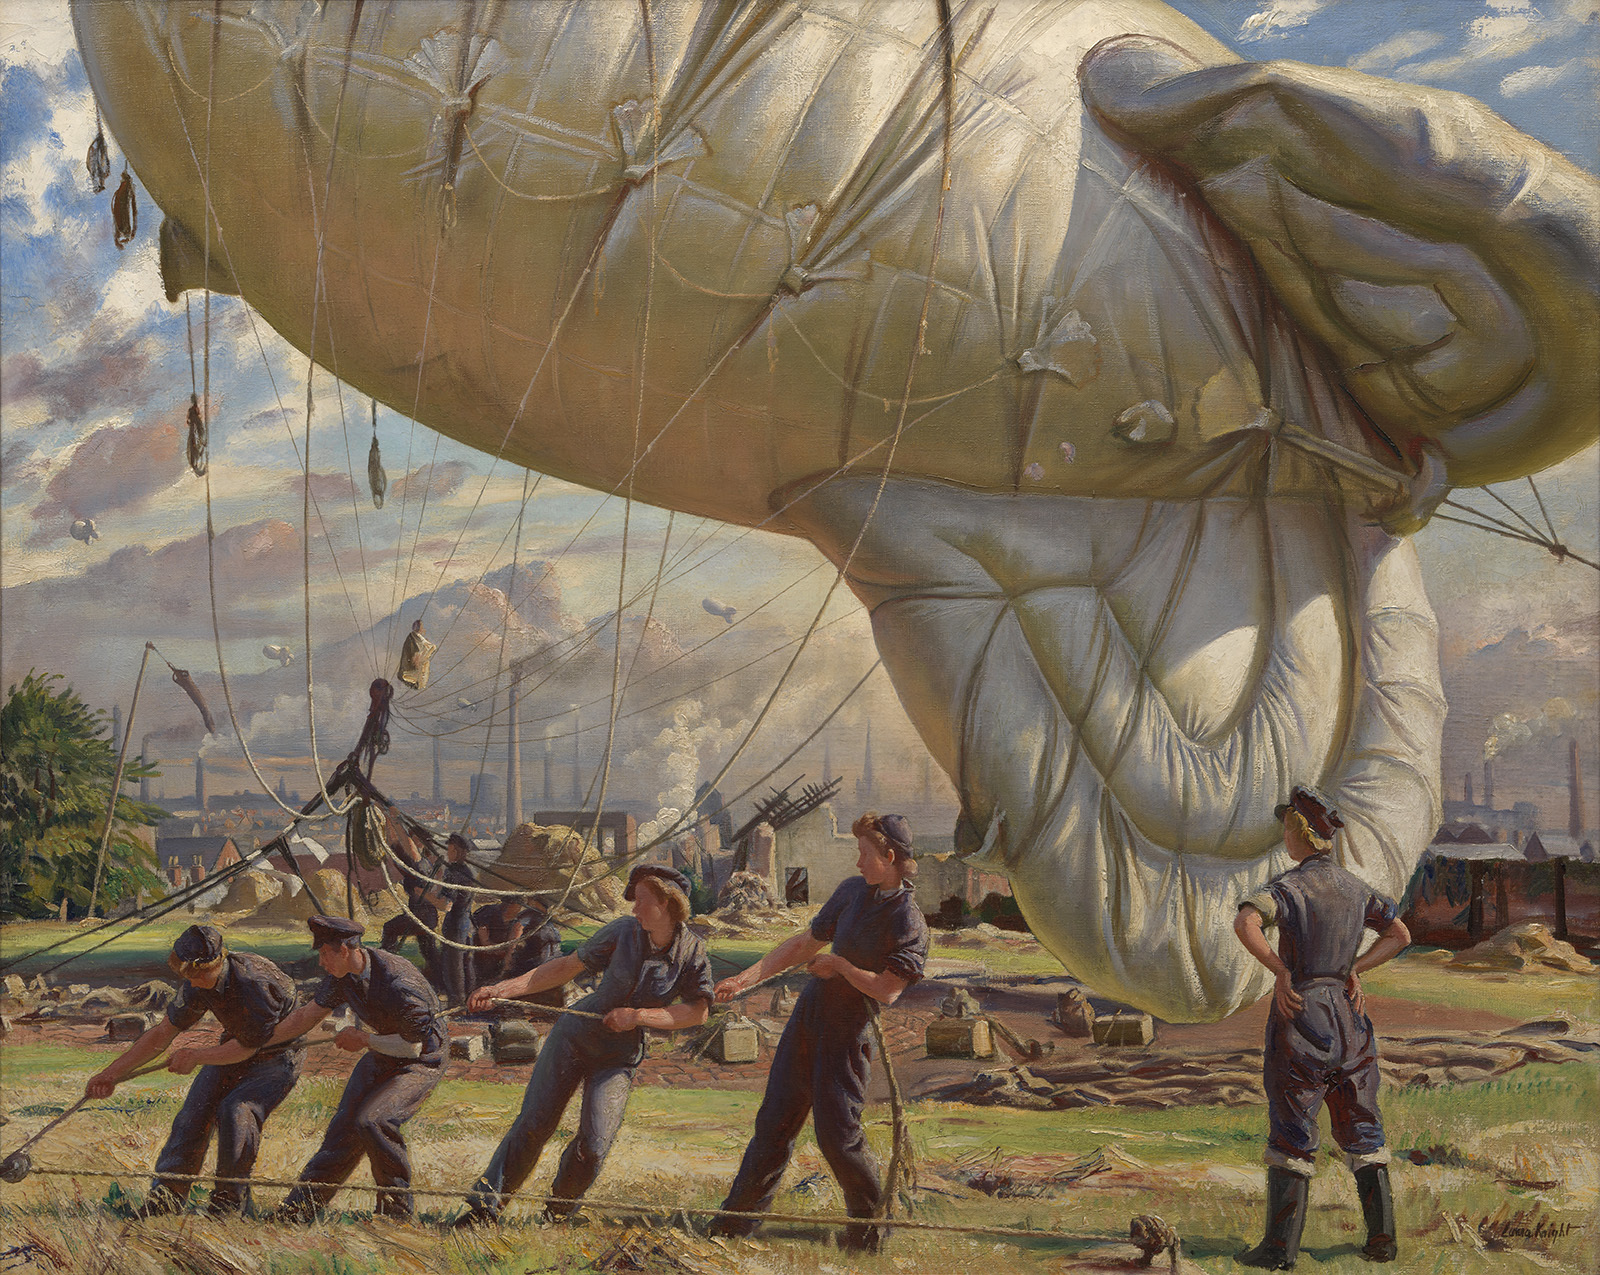 3727451 A Balloon Site, Coventry, 1943 (oil on canvas) by Knight, Laura (1877-1970); 102.5x127 cm; Imperial War Museum, London, UK; (add.info.: A barrage balloon being hoisted into position by WAAF women in blue overalls. Coventry is visible in the